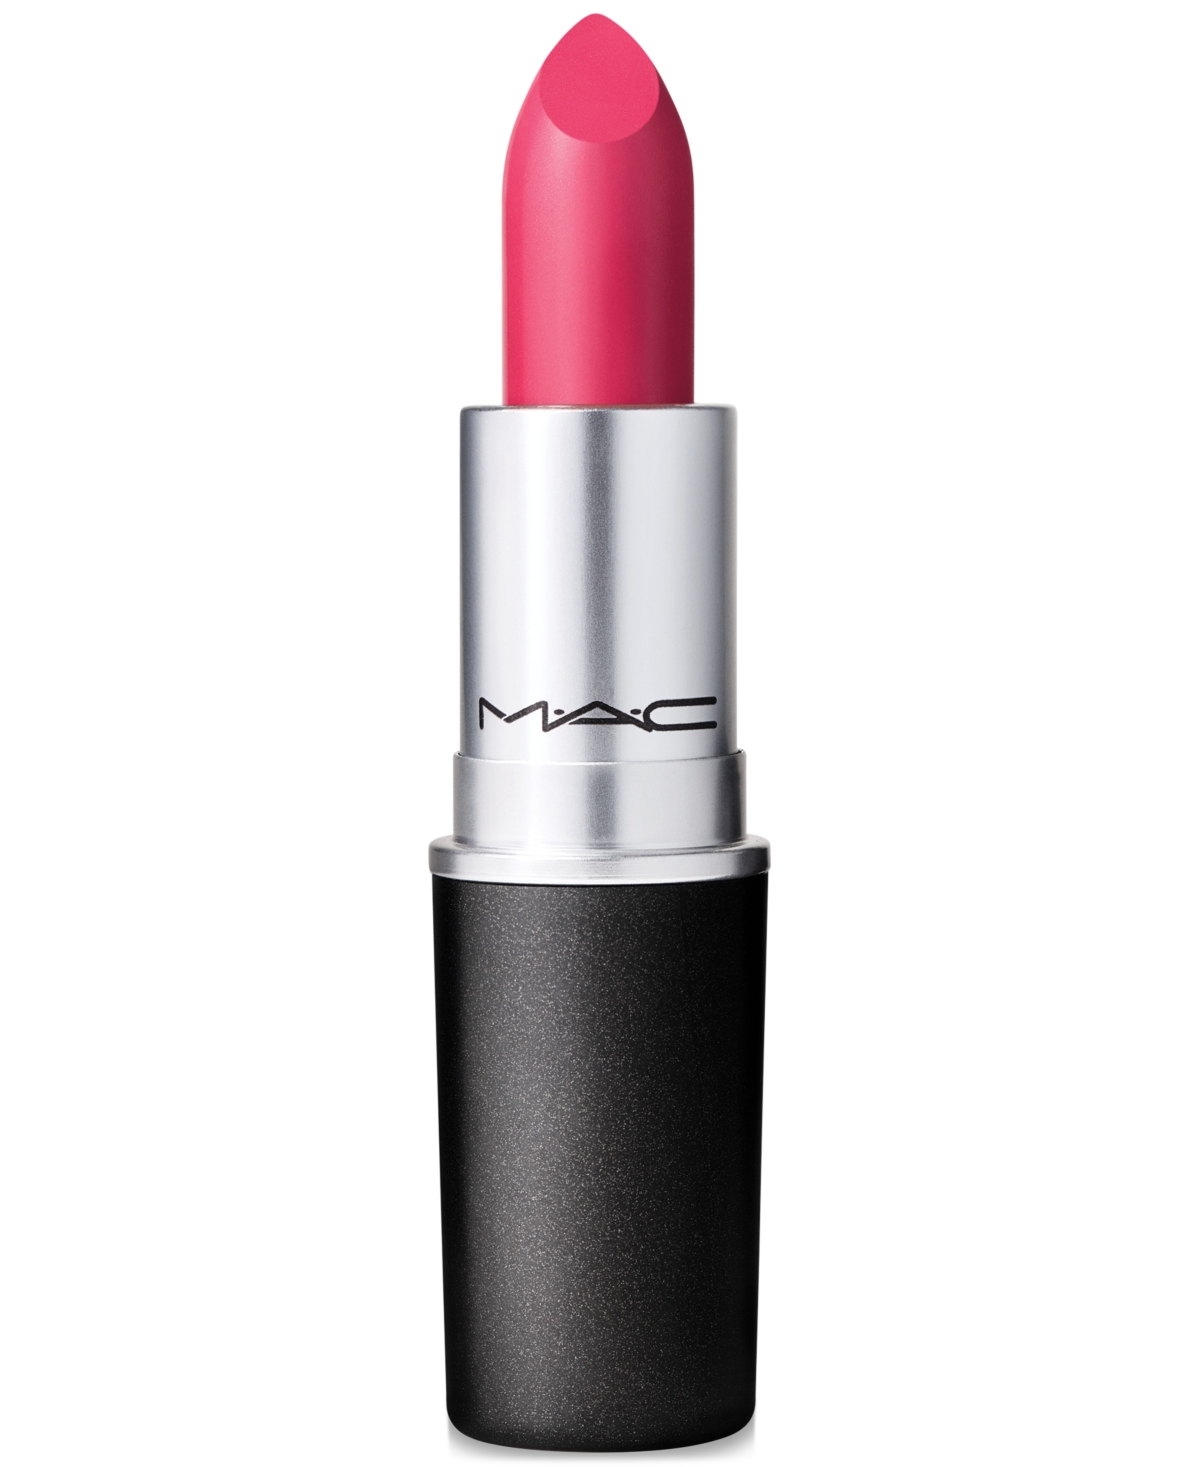 Mac Re-think Pink Amplified Lipstick In Just Wondering (bright Raspberry With Ye